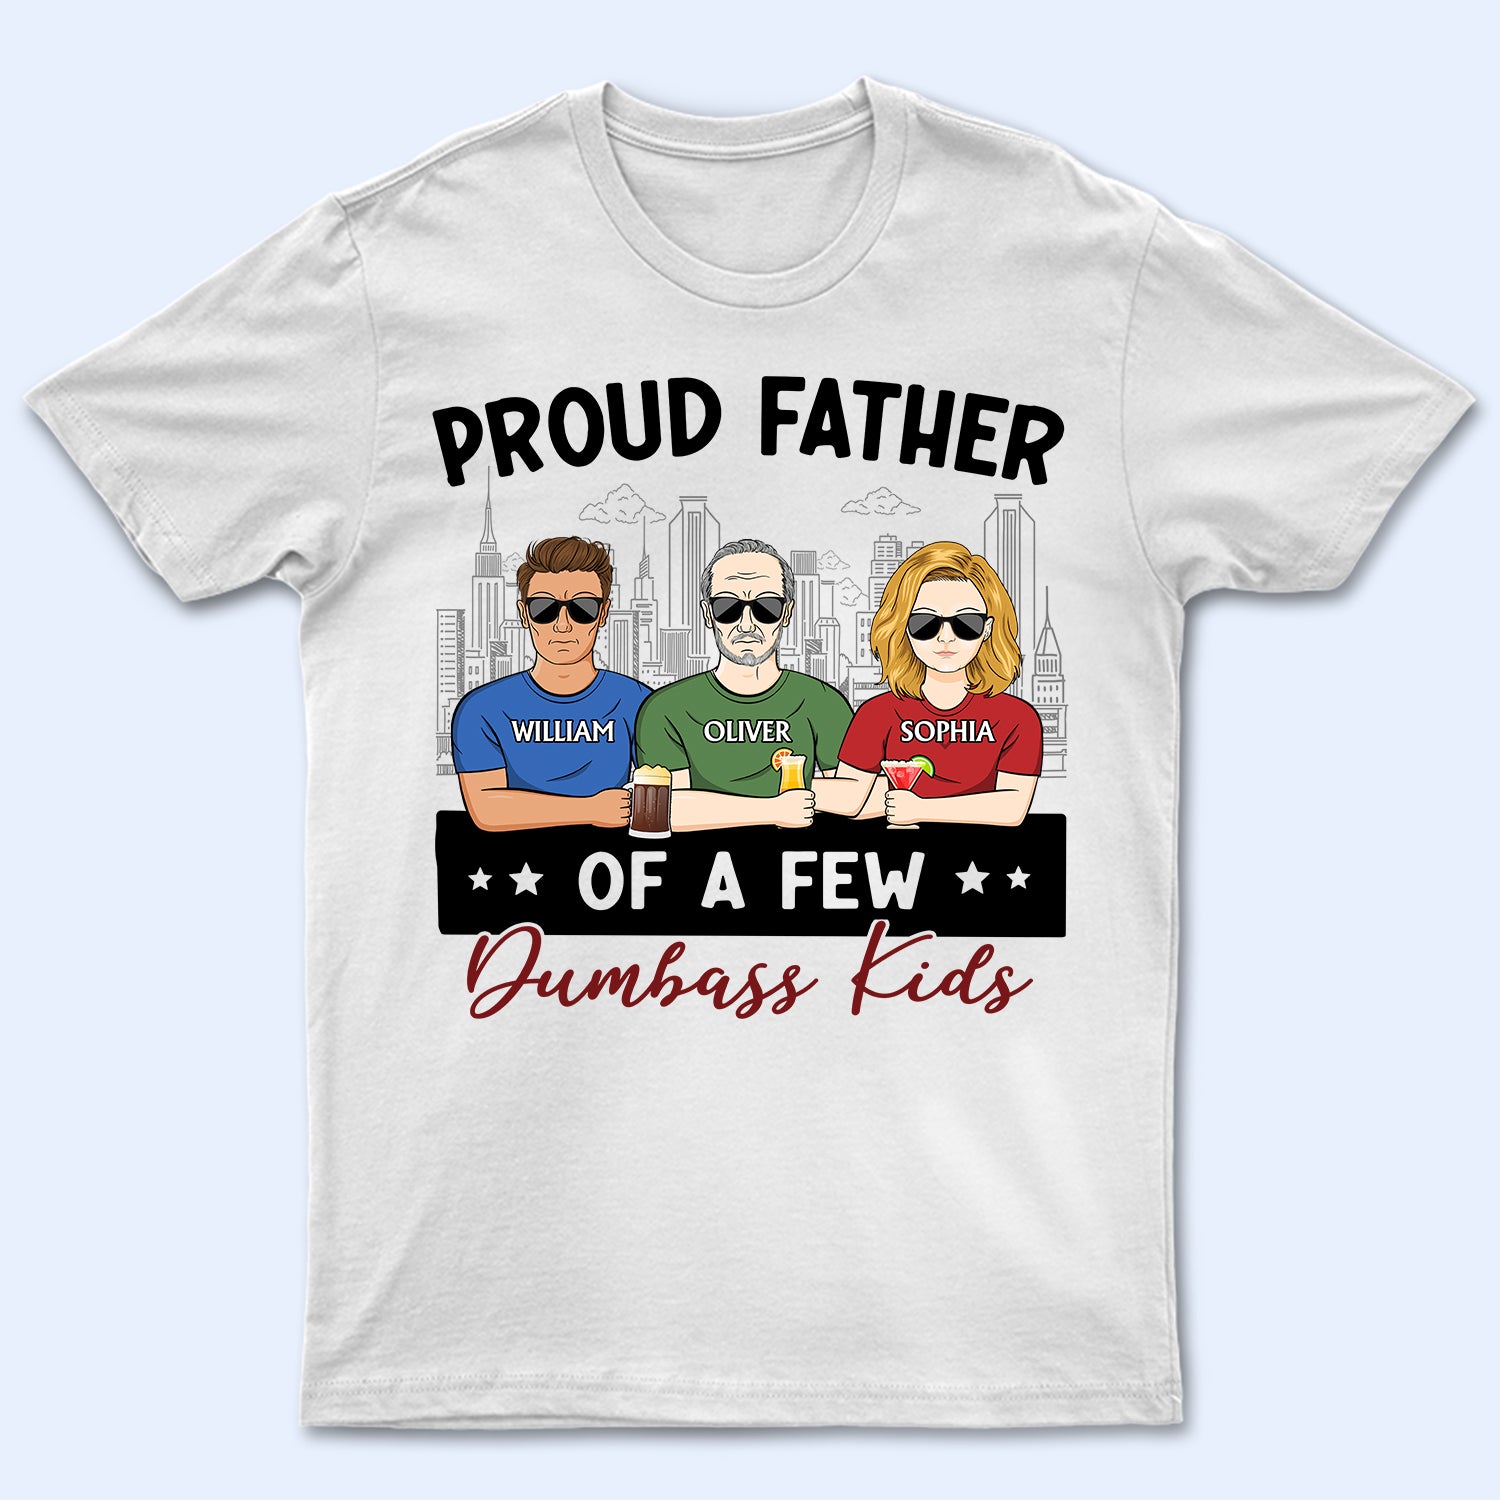 Proud Father Of A Few - Gift For Dad, Father, Grandpa - Personalized T Shirt